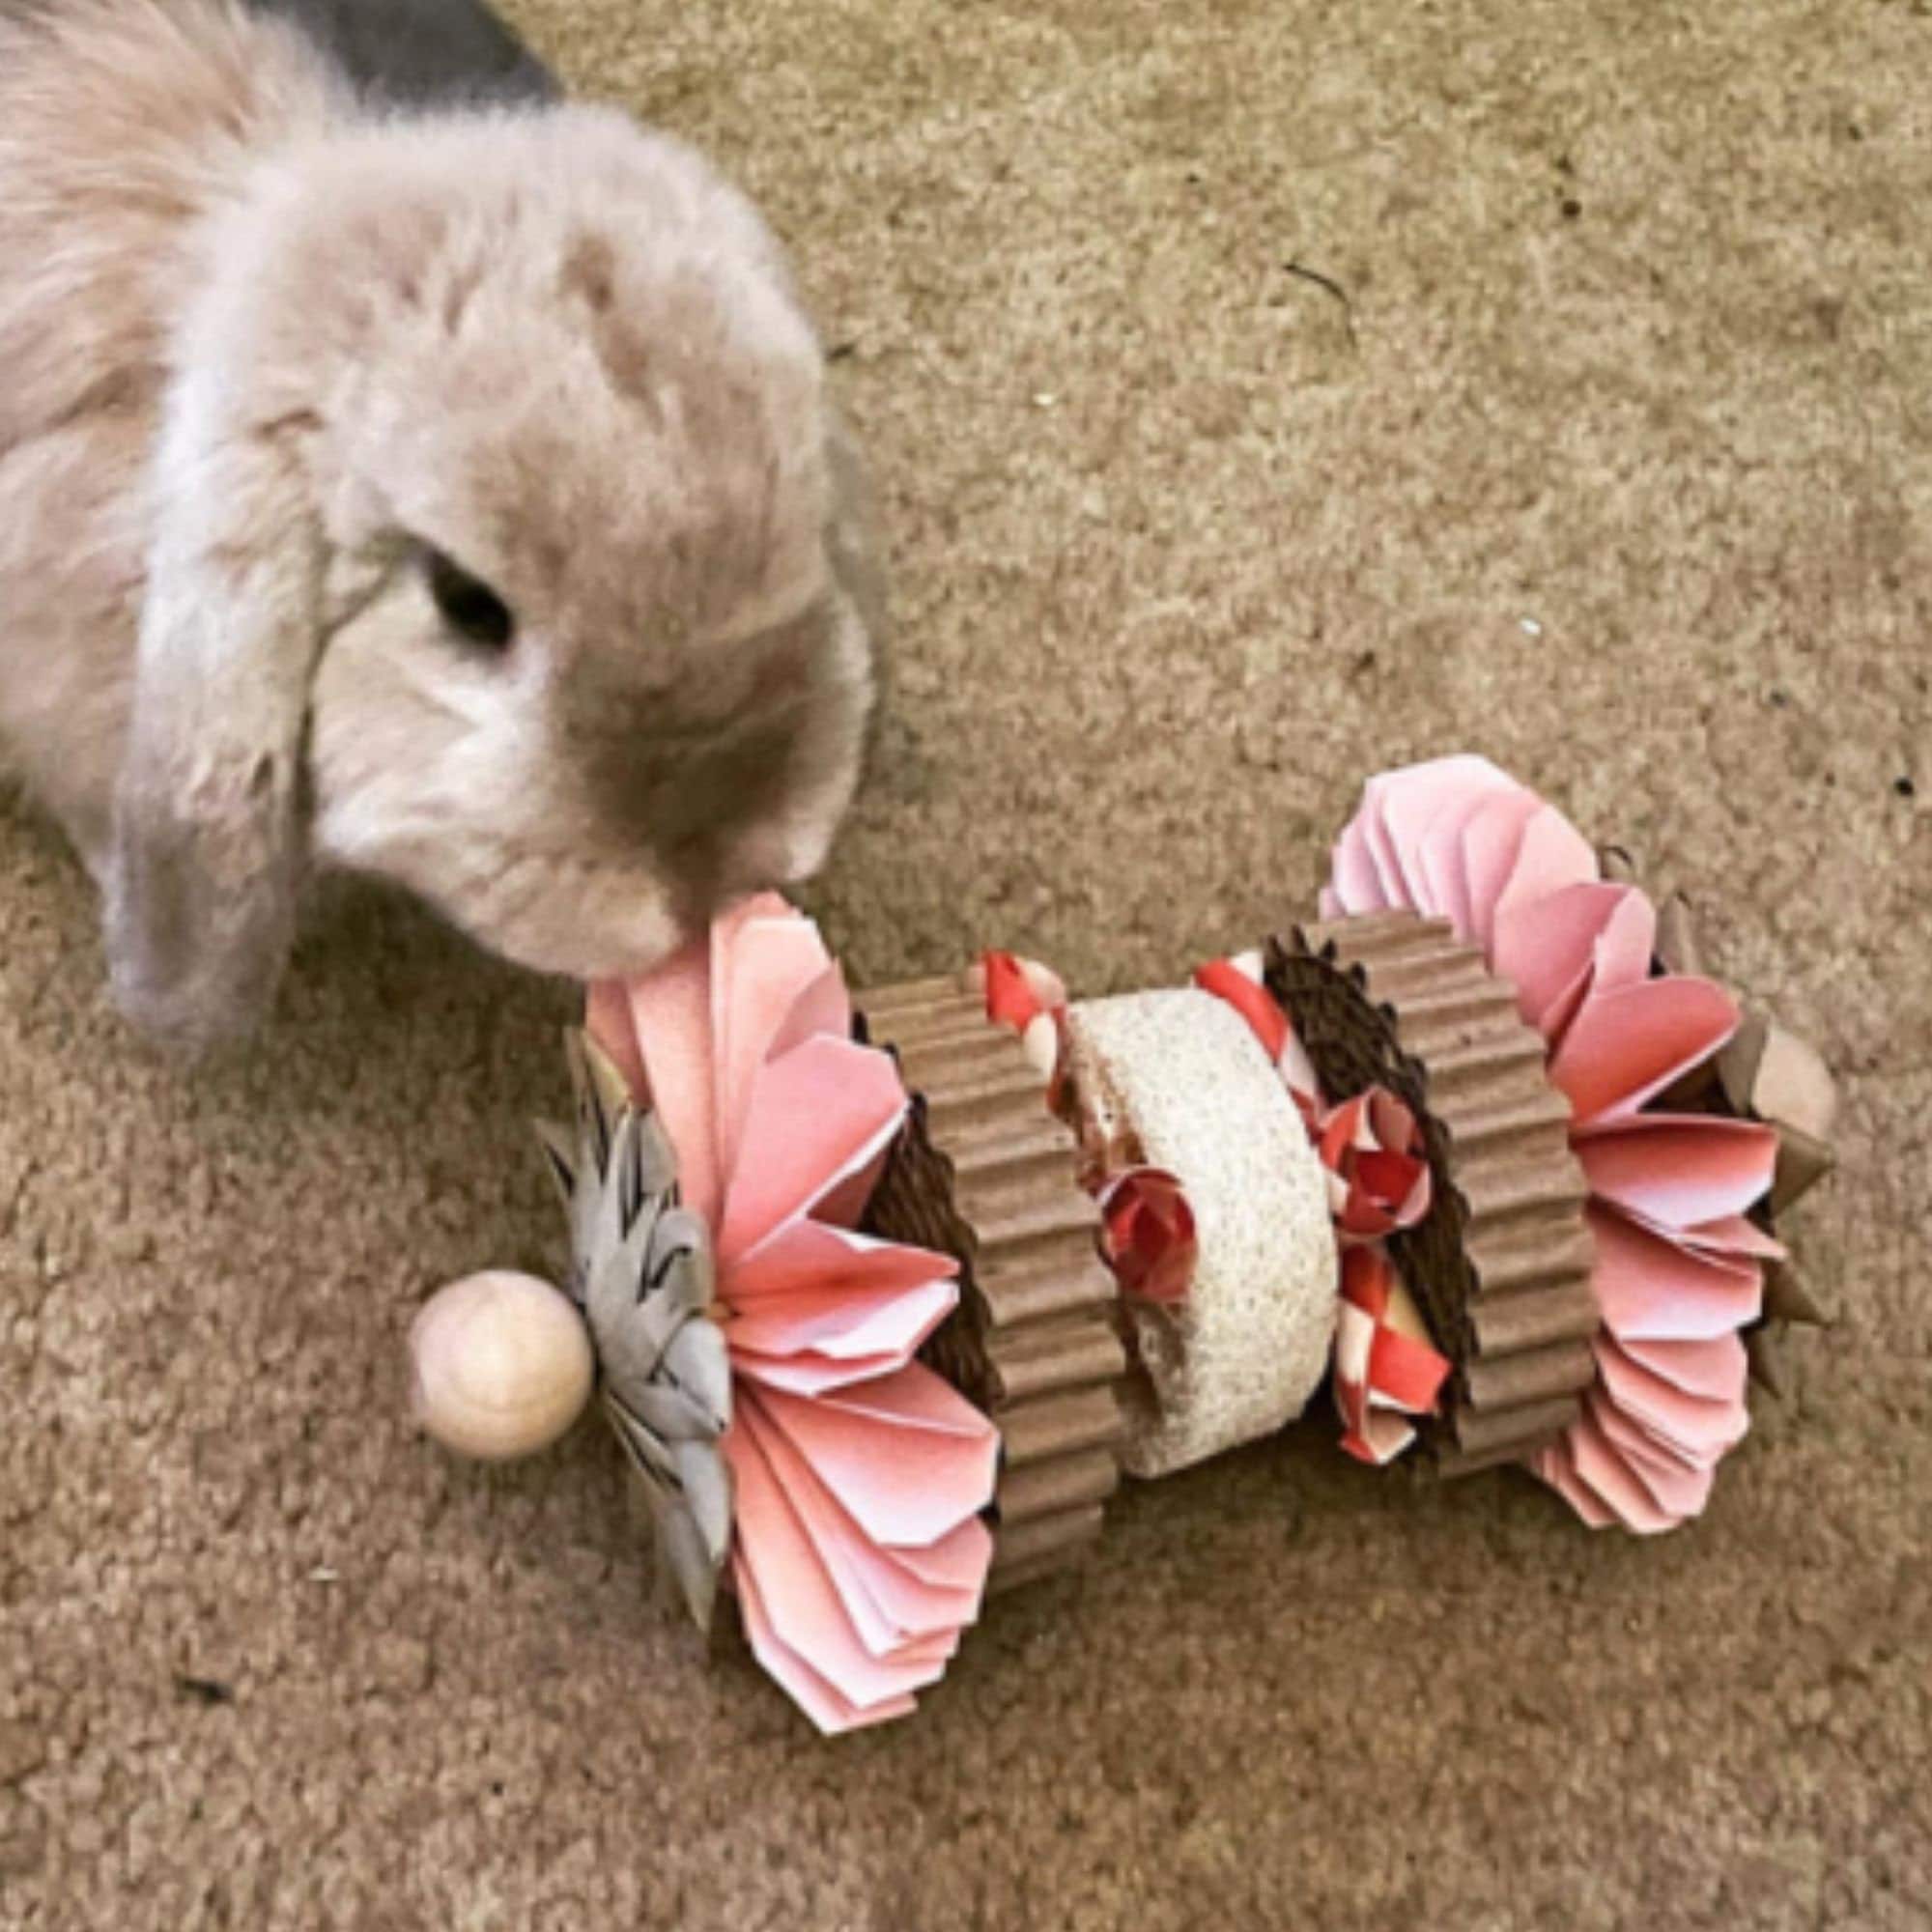 17 Toys to Get (or make!) For Your Pet Rabbit